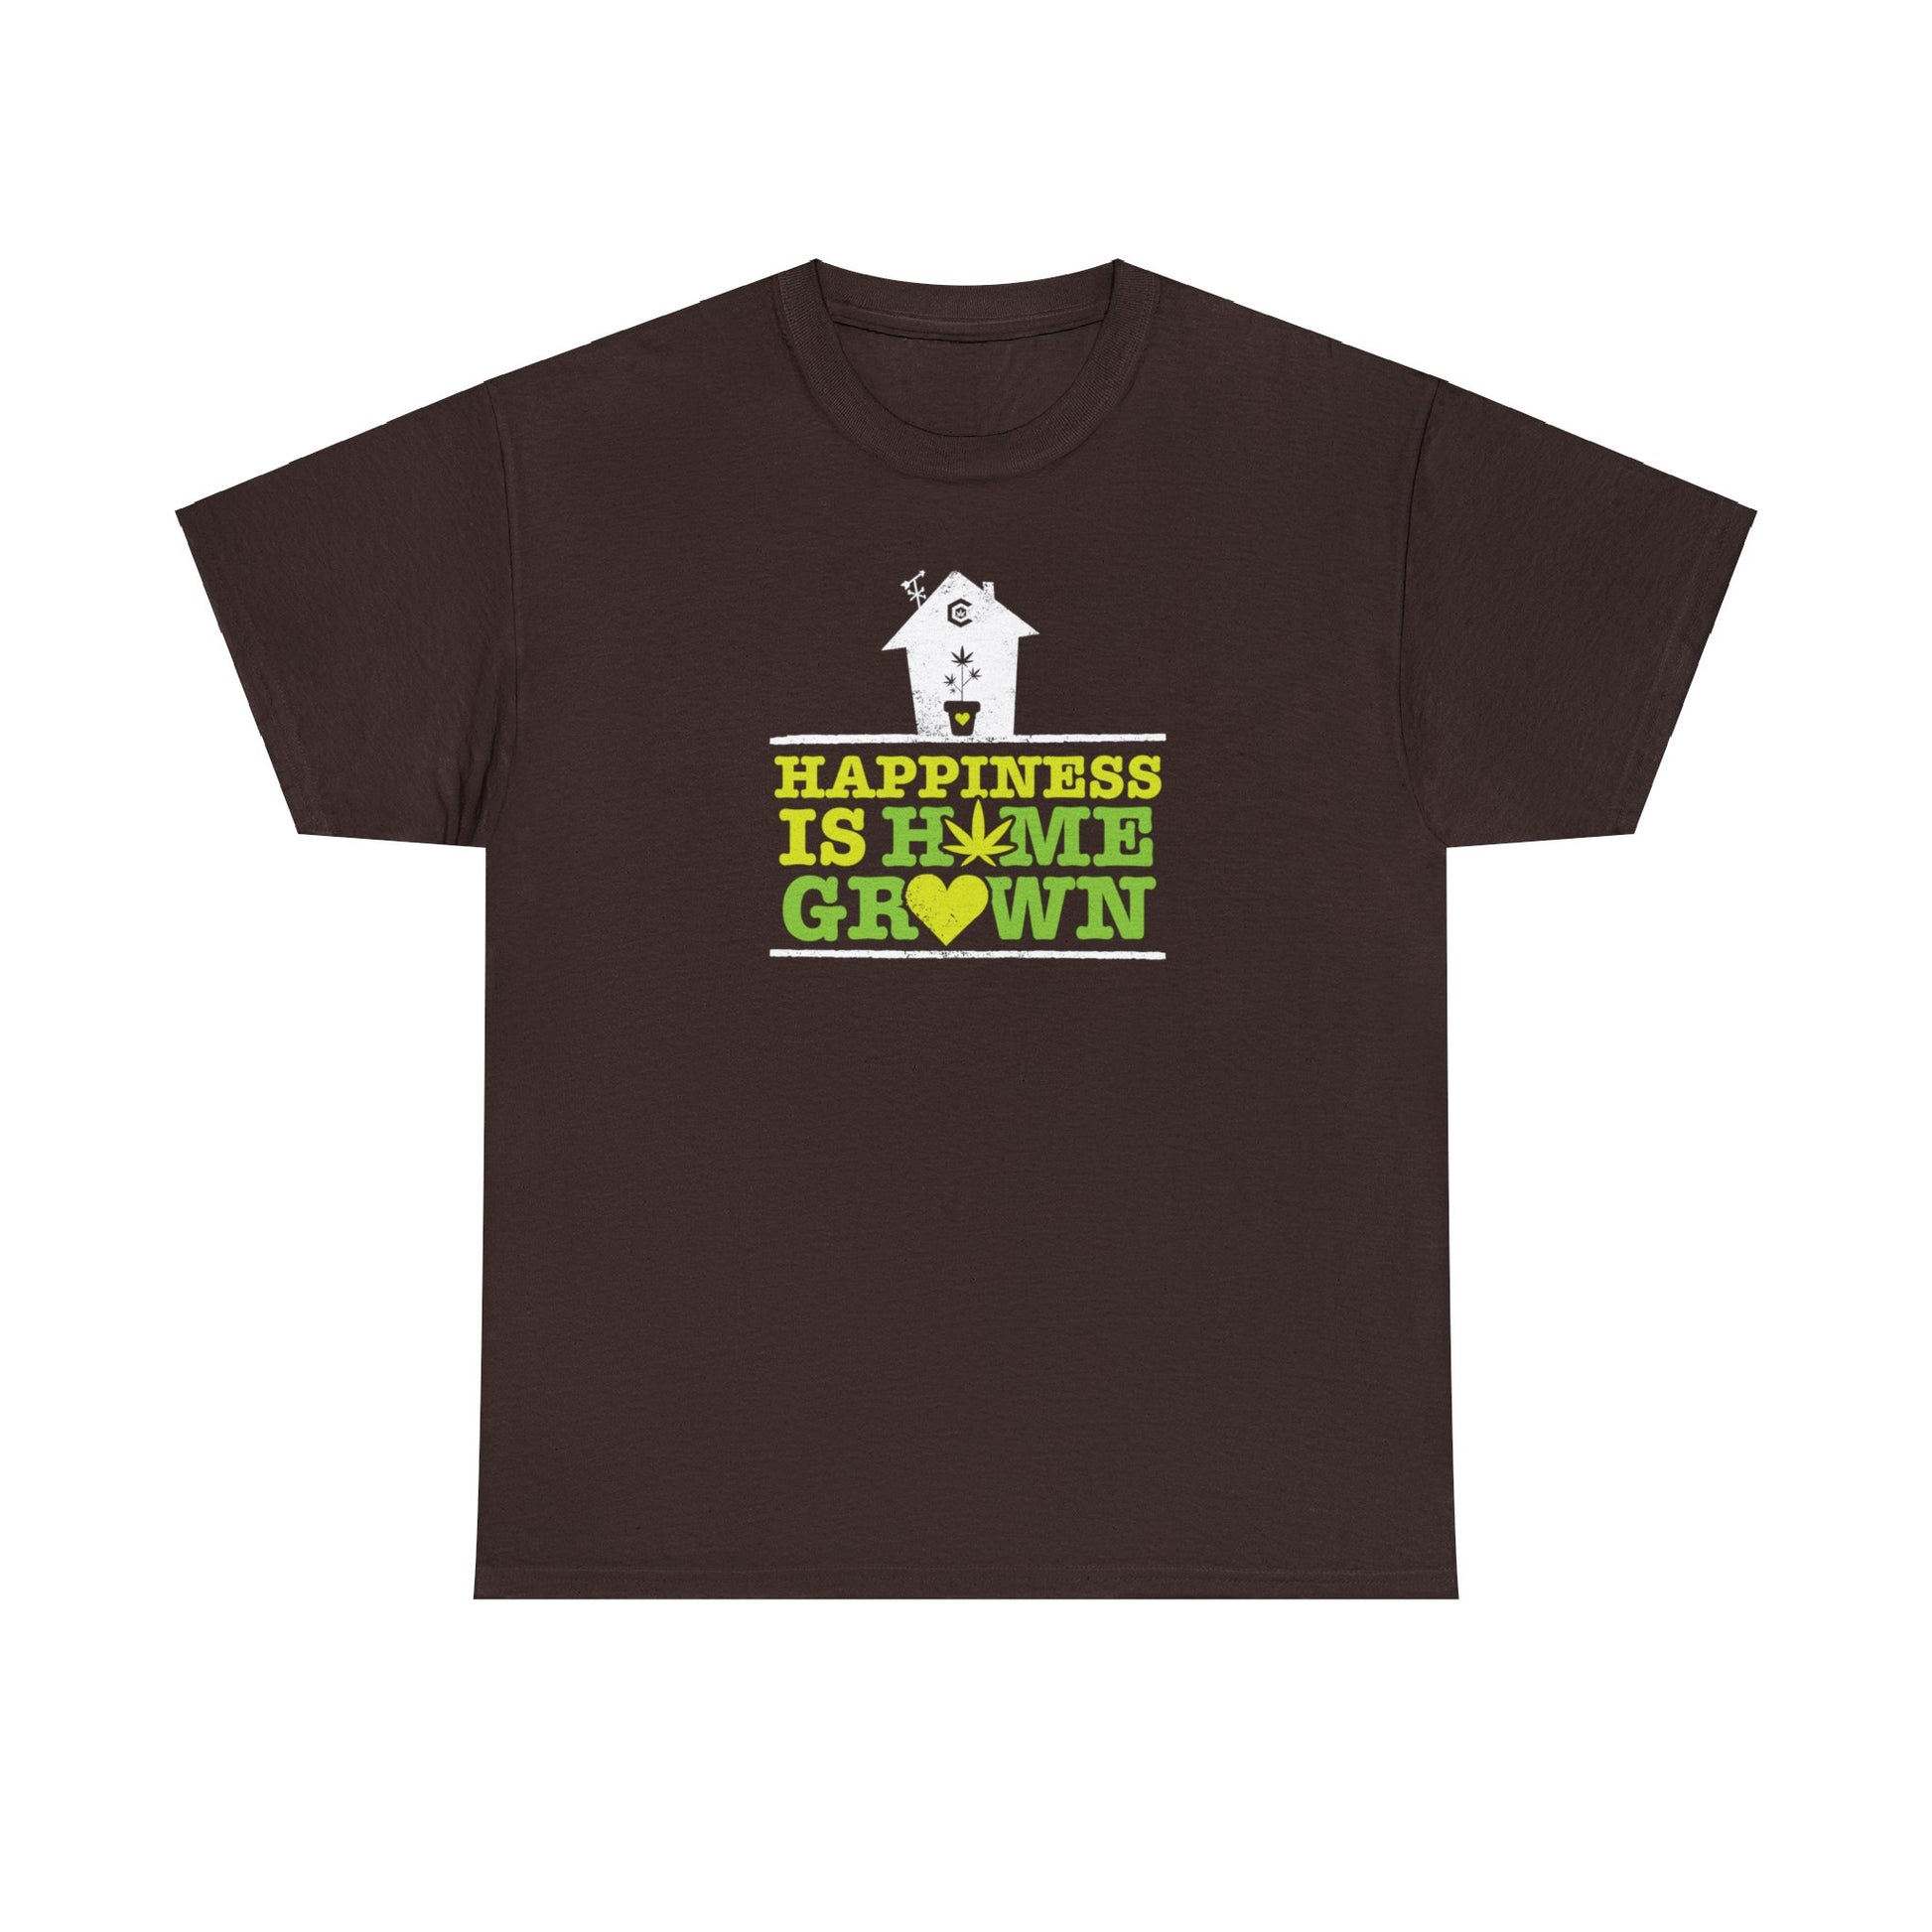 A Happiness Is Homegrown Pot Shirt with a green and yellow house on it, available for sale.